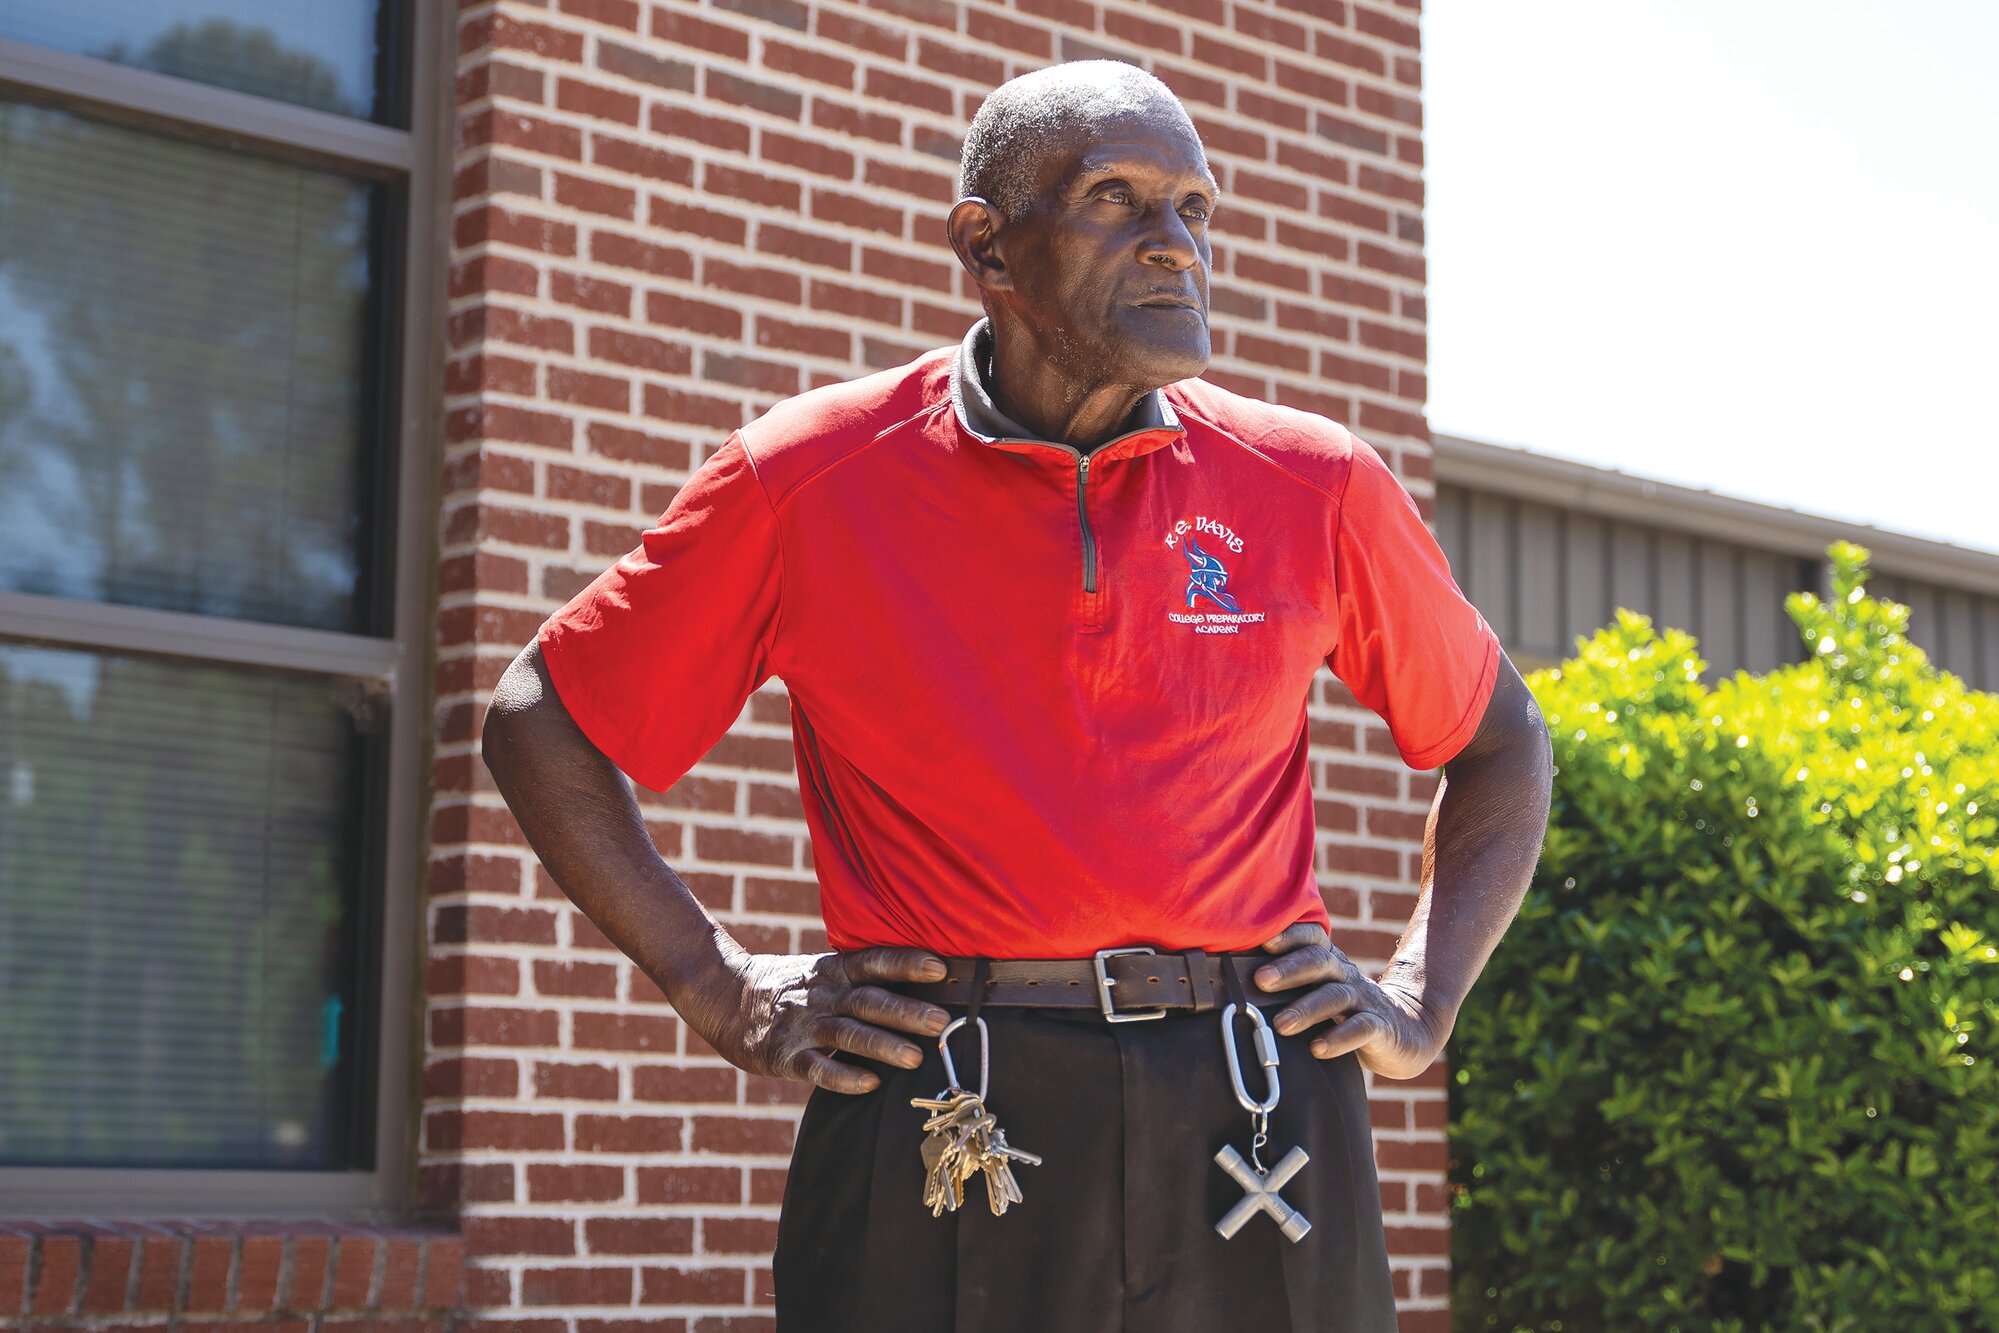 Groundsman Fulton McFadden with R.E. Davis College Preparatory Academy has been helping maintain schools in Sumter School District for decades, inside and out. He has spent more than 50 years with Sumter School District 2 and Sumter School District.